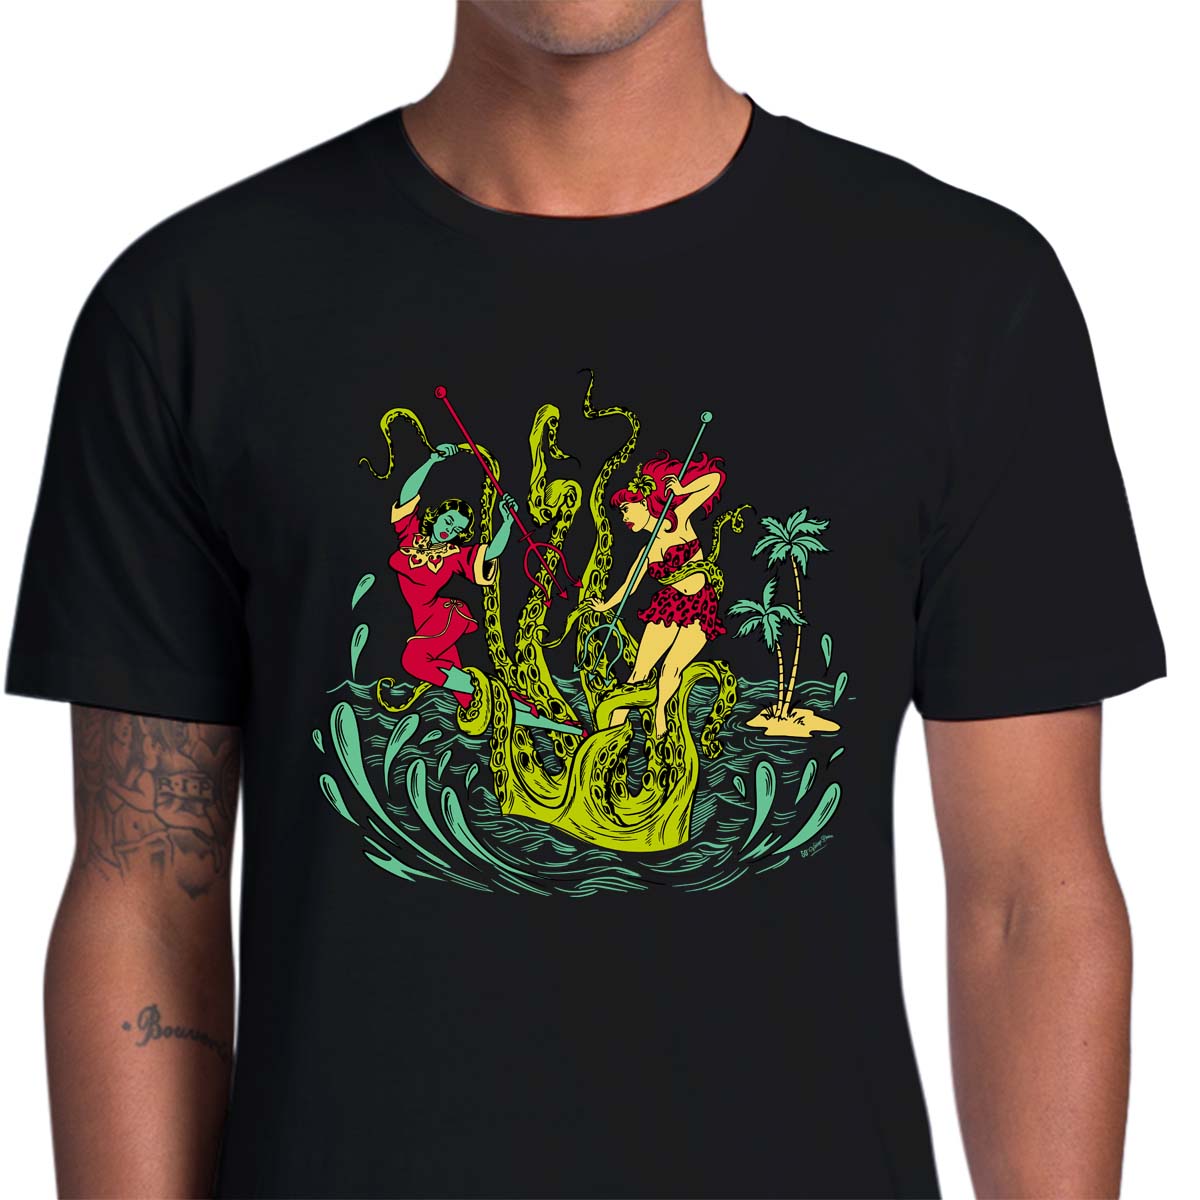 Unisex black tee shirt with a graphic of two women battling a giant Kracken